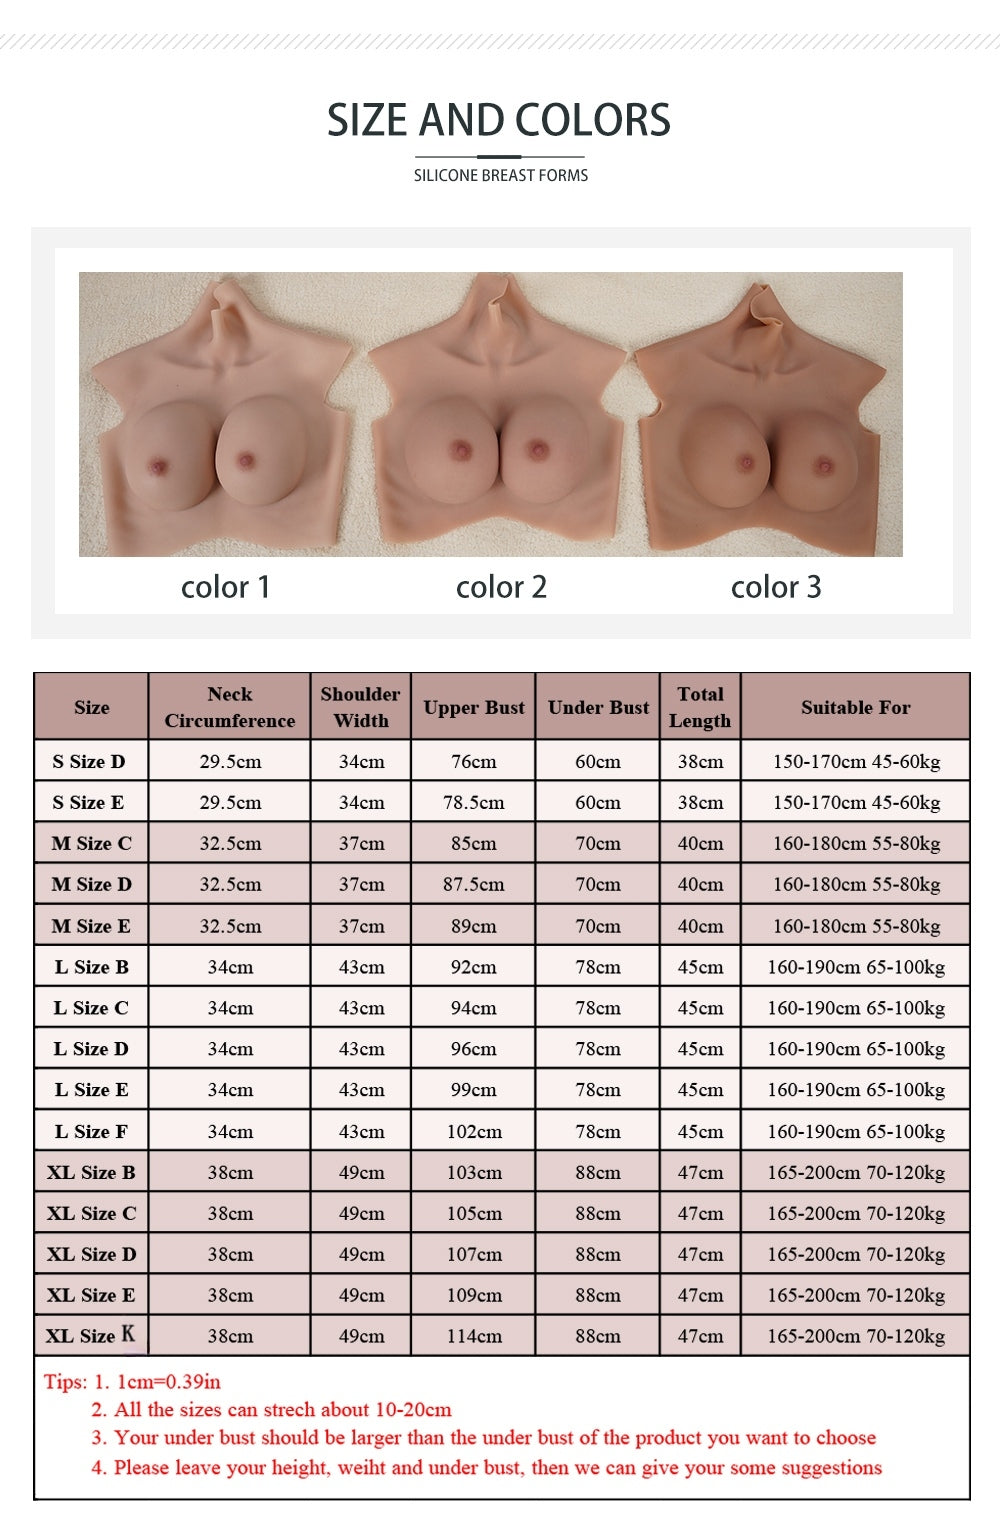 EYUNG 8th New Upgraded Airbag+Silicone or Full Silicone Top Quality Realistic Silicone Breast Forms With Bloodshot Design